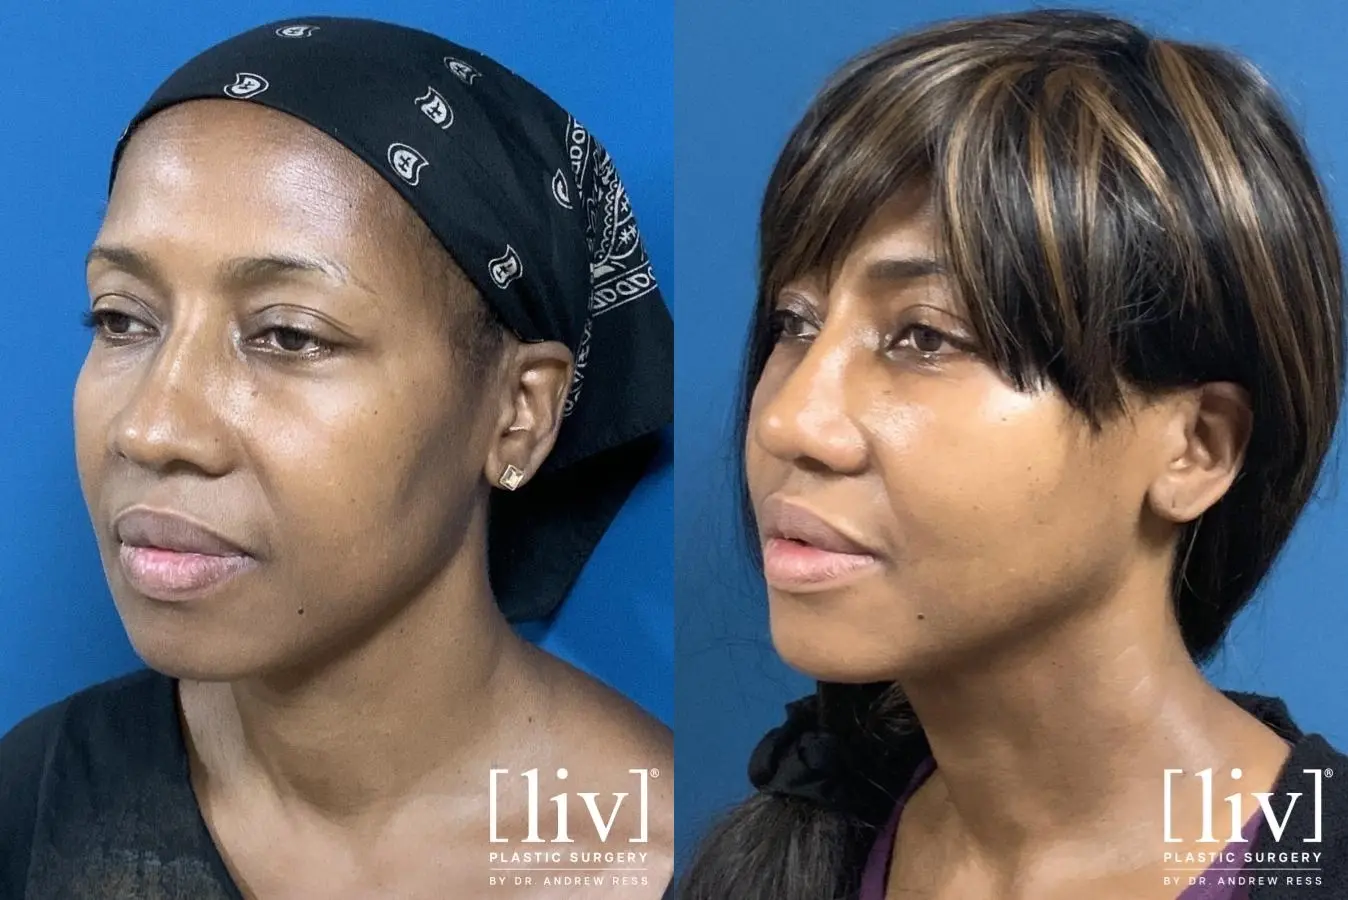 Rhinoplasty: Patient 10 - Before and After 2